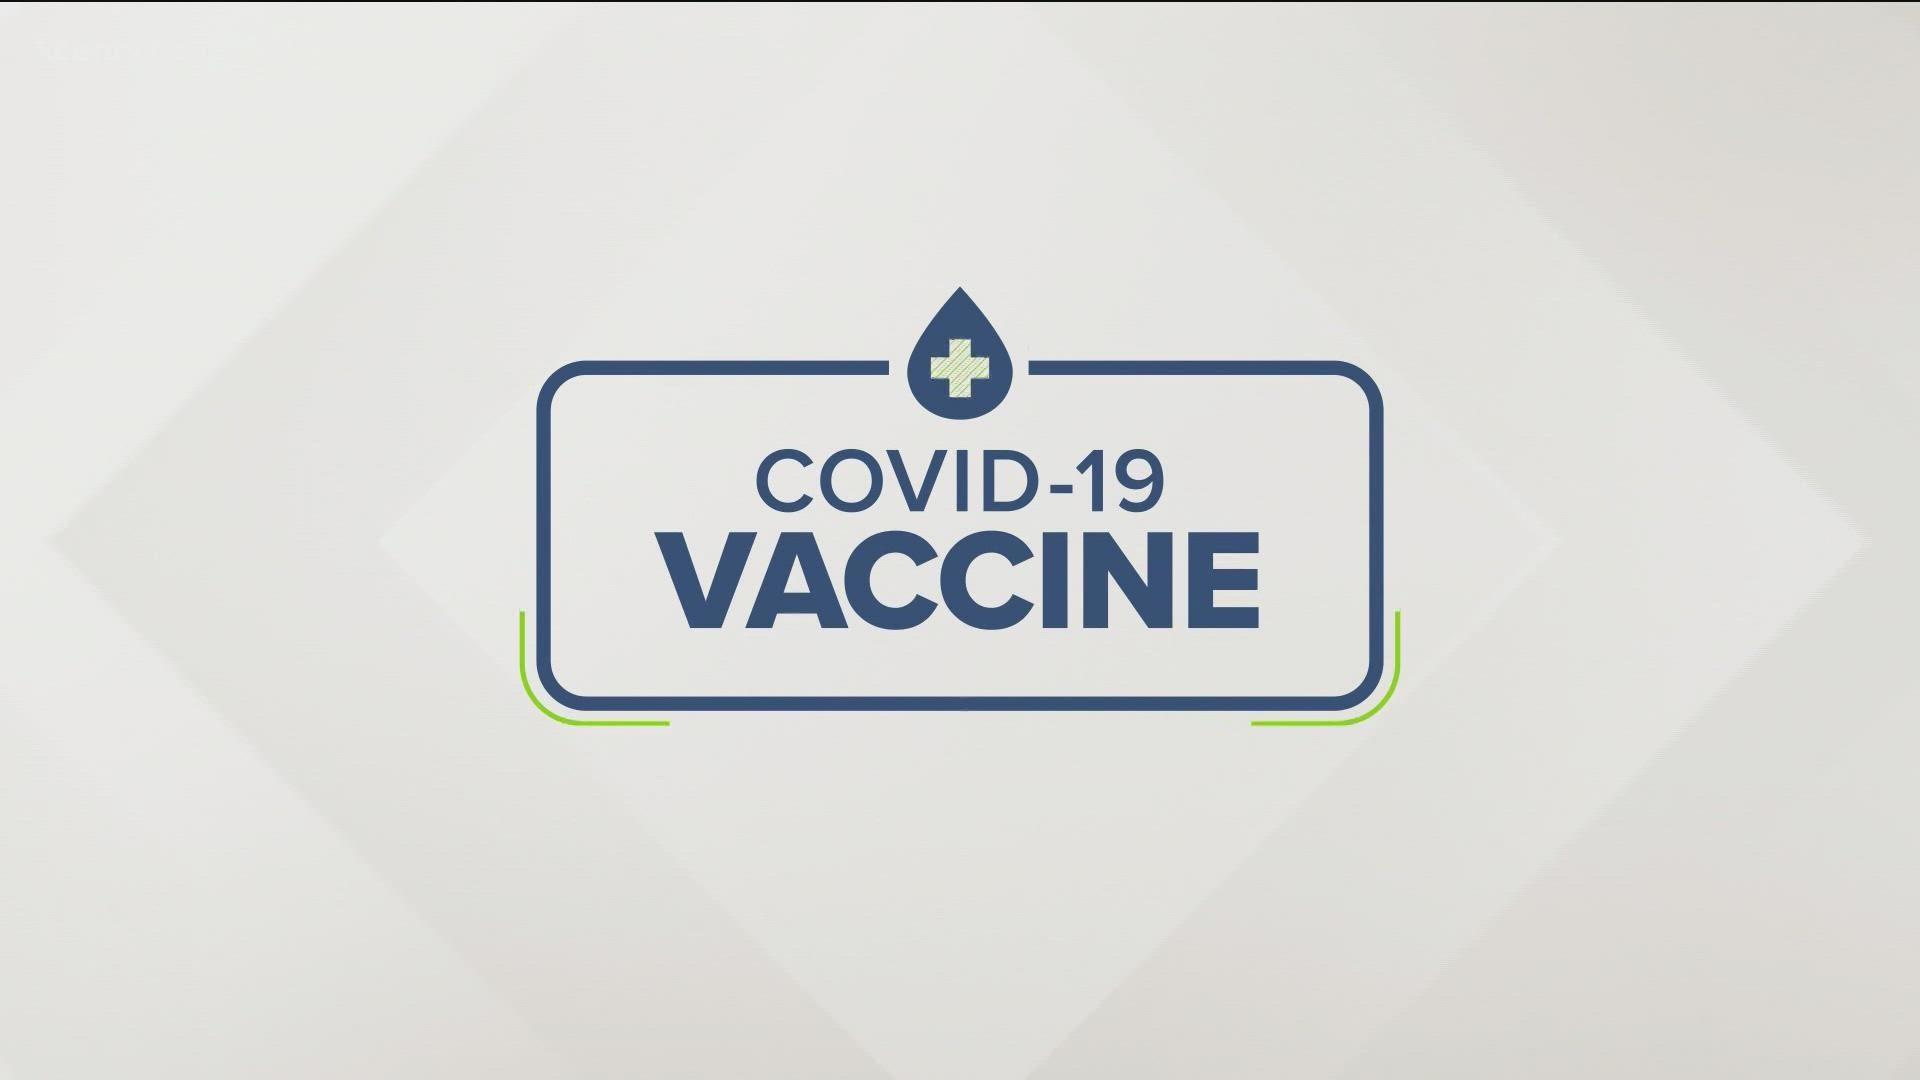 The Pfizer vaccine is the only option in the U.S. for anyone younger than 18, either for initial vaccination or for use as a booster.